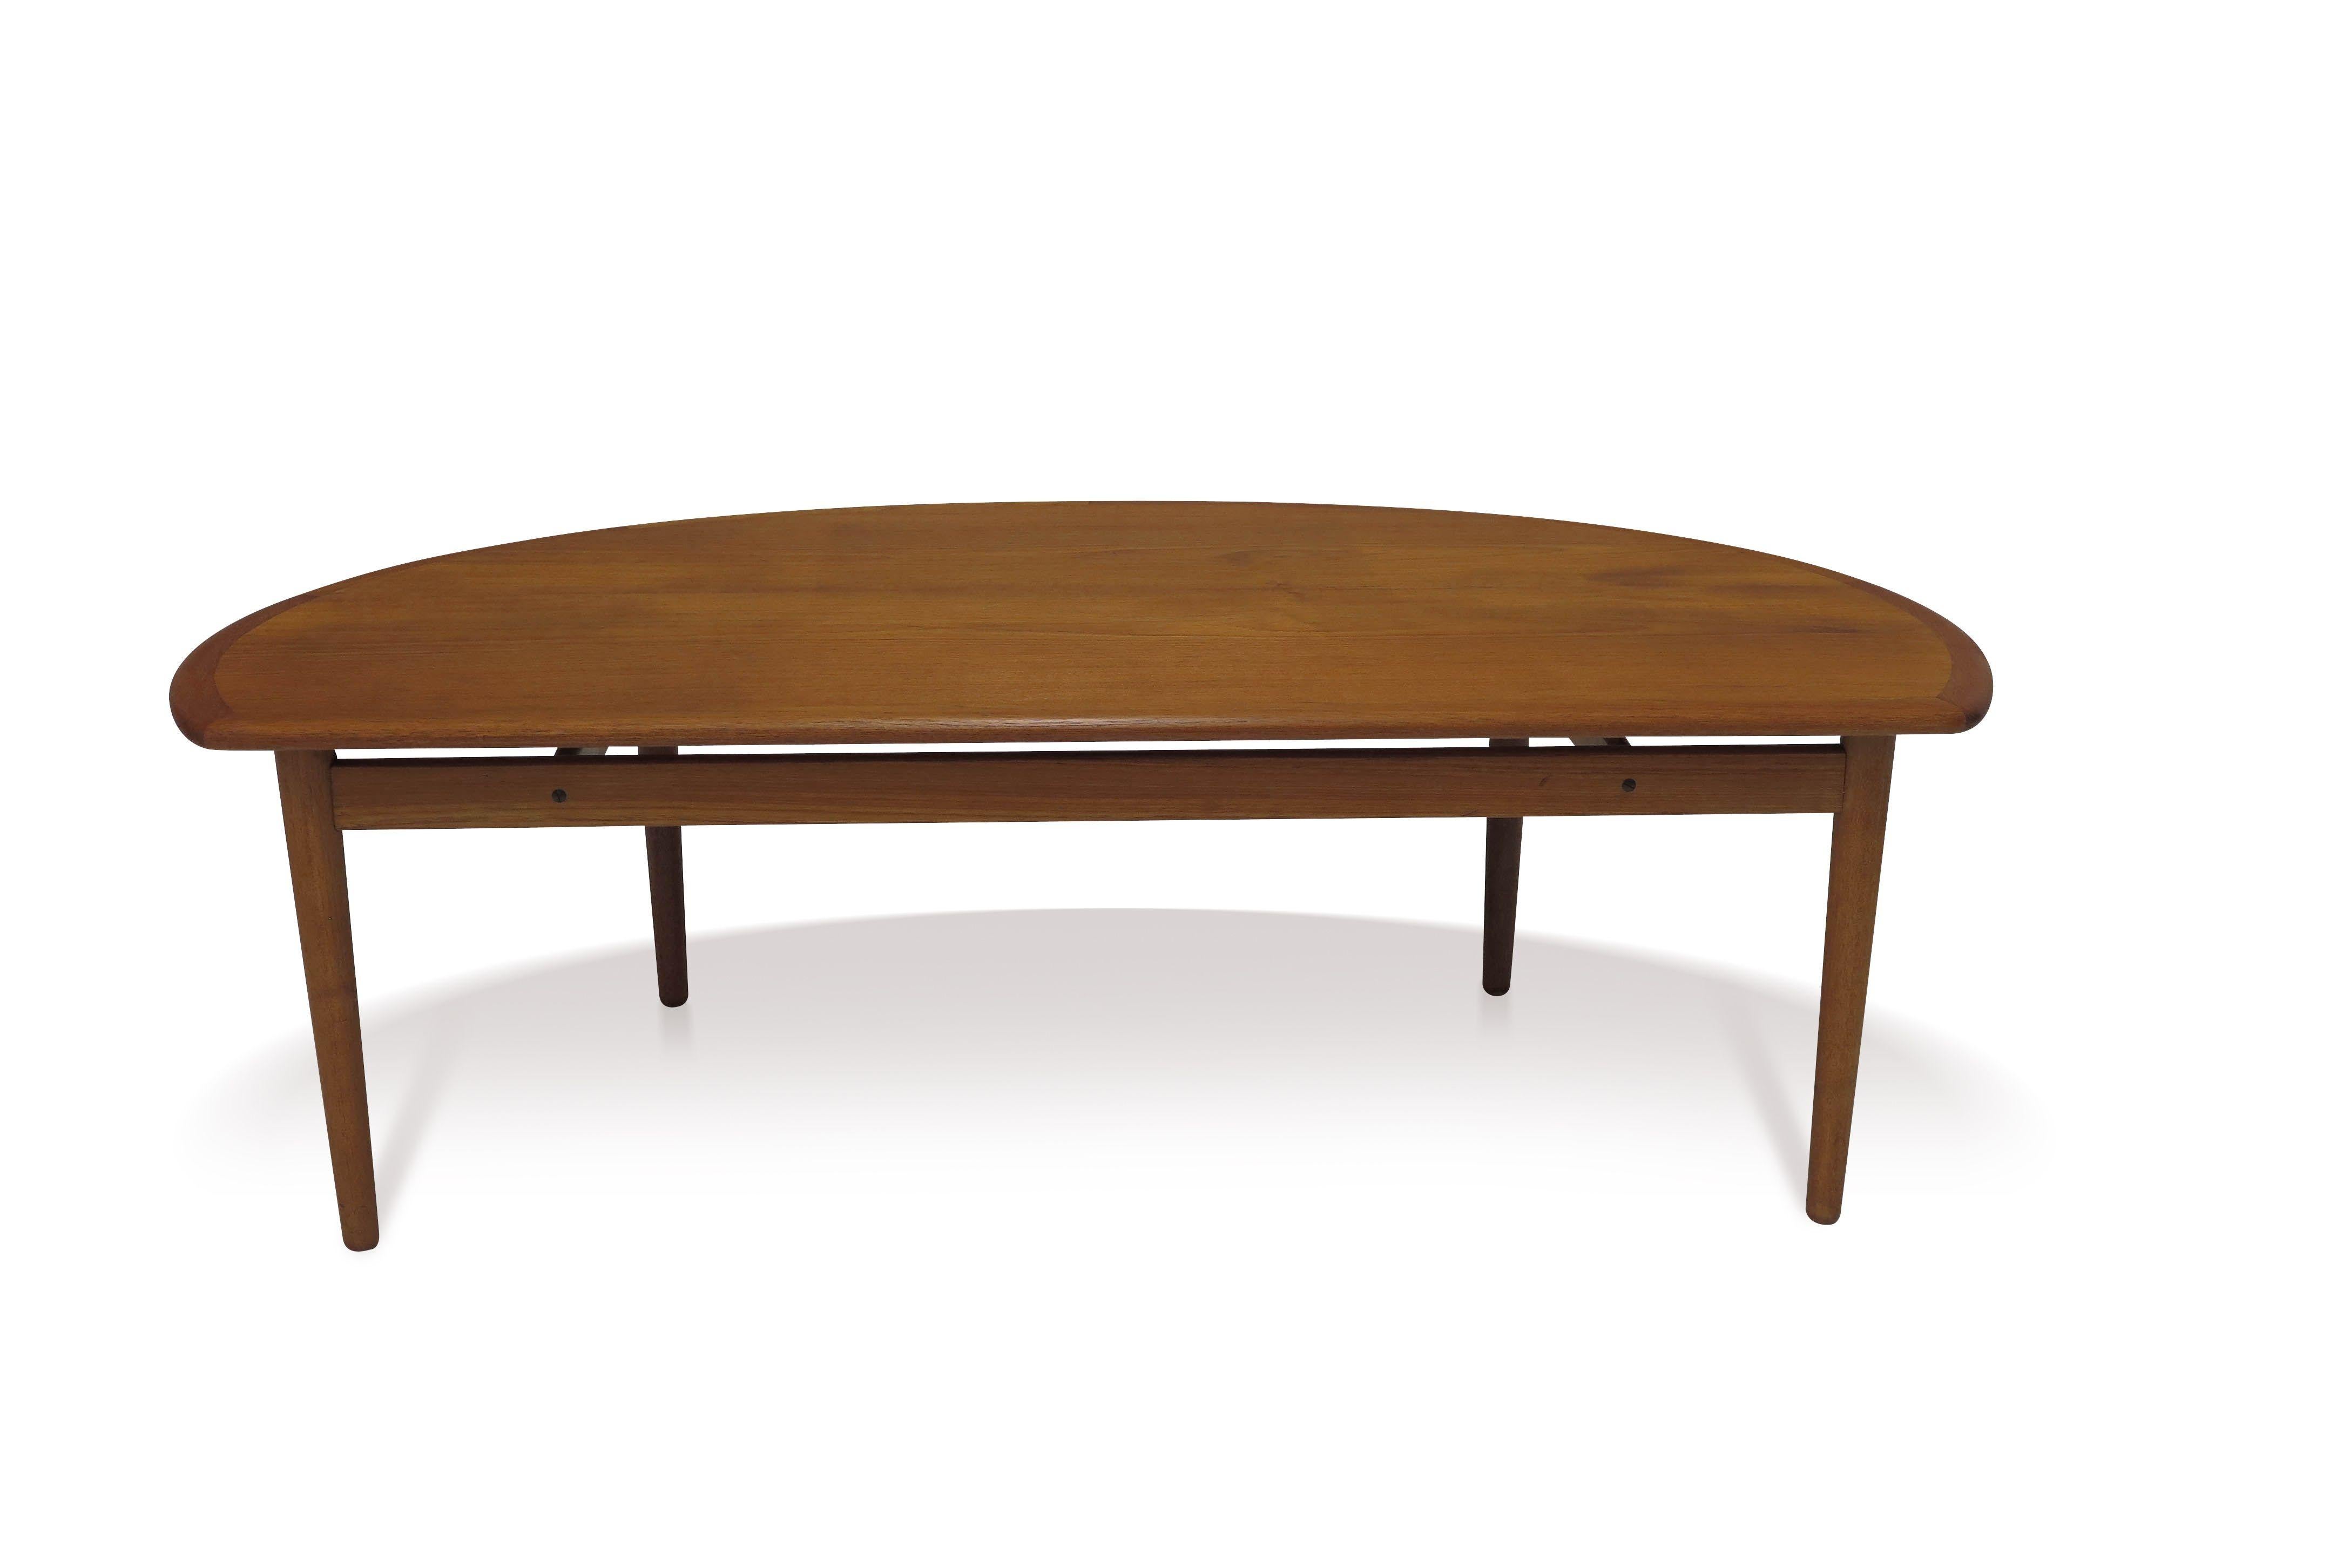 Mid-century Danish teak coffee table designed by Johannes Andersen crafted of old-growth teak with half round form raised on solid teak tapered legs with cross stretchers.